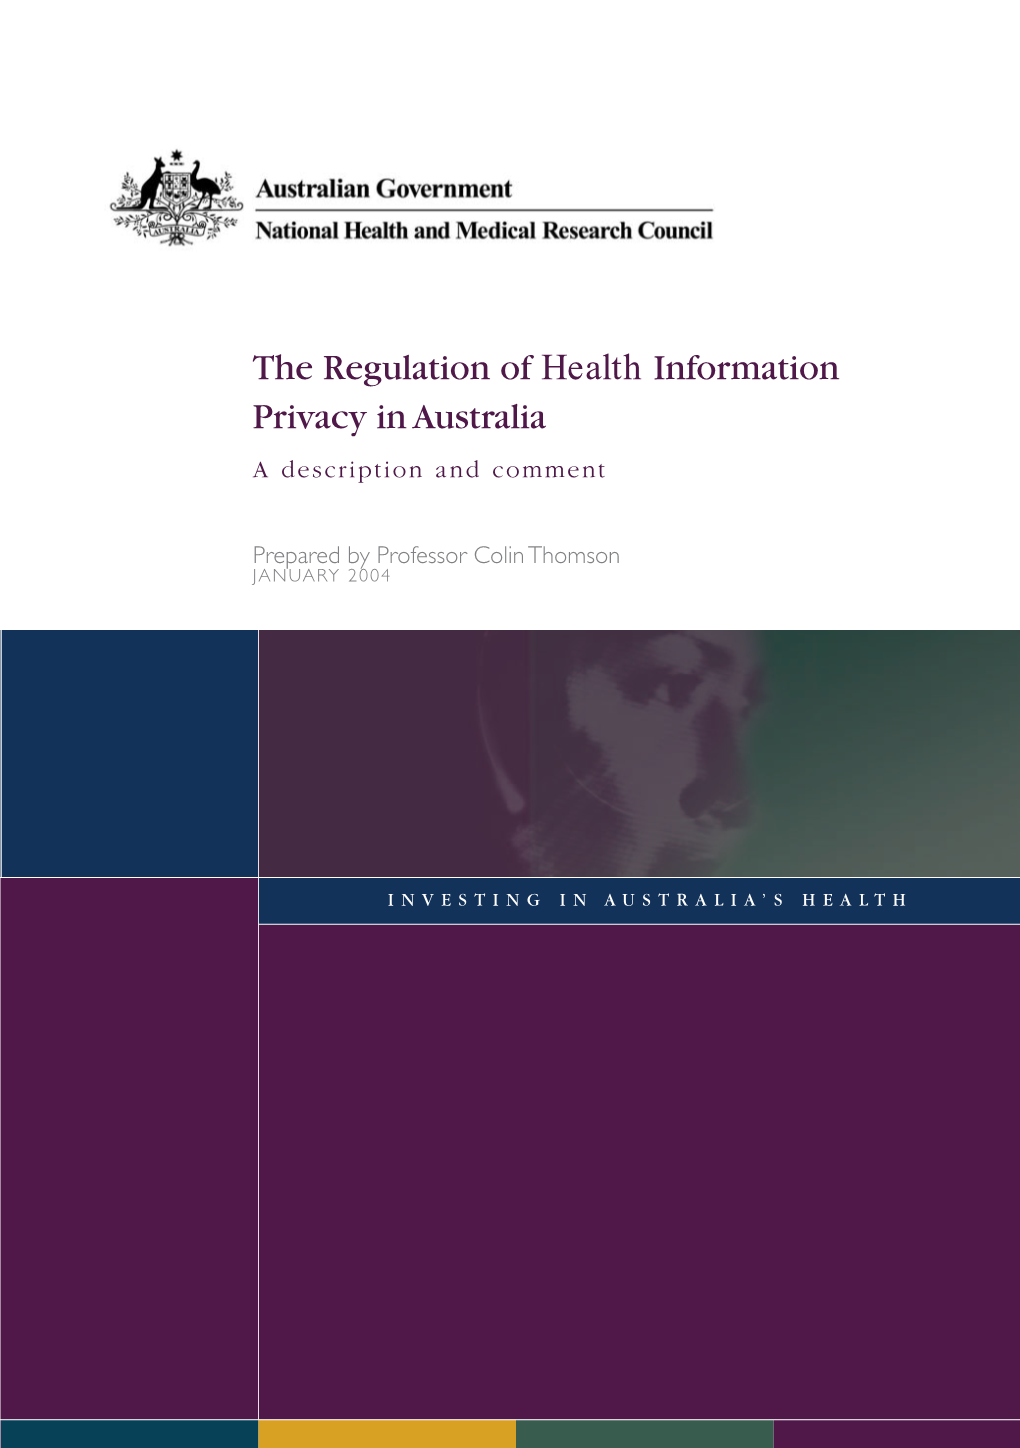 The Regulation of Health Information Privacy in Australia a Description and Comment